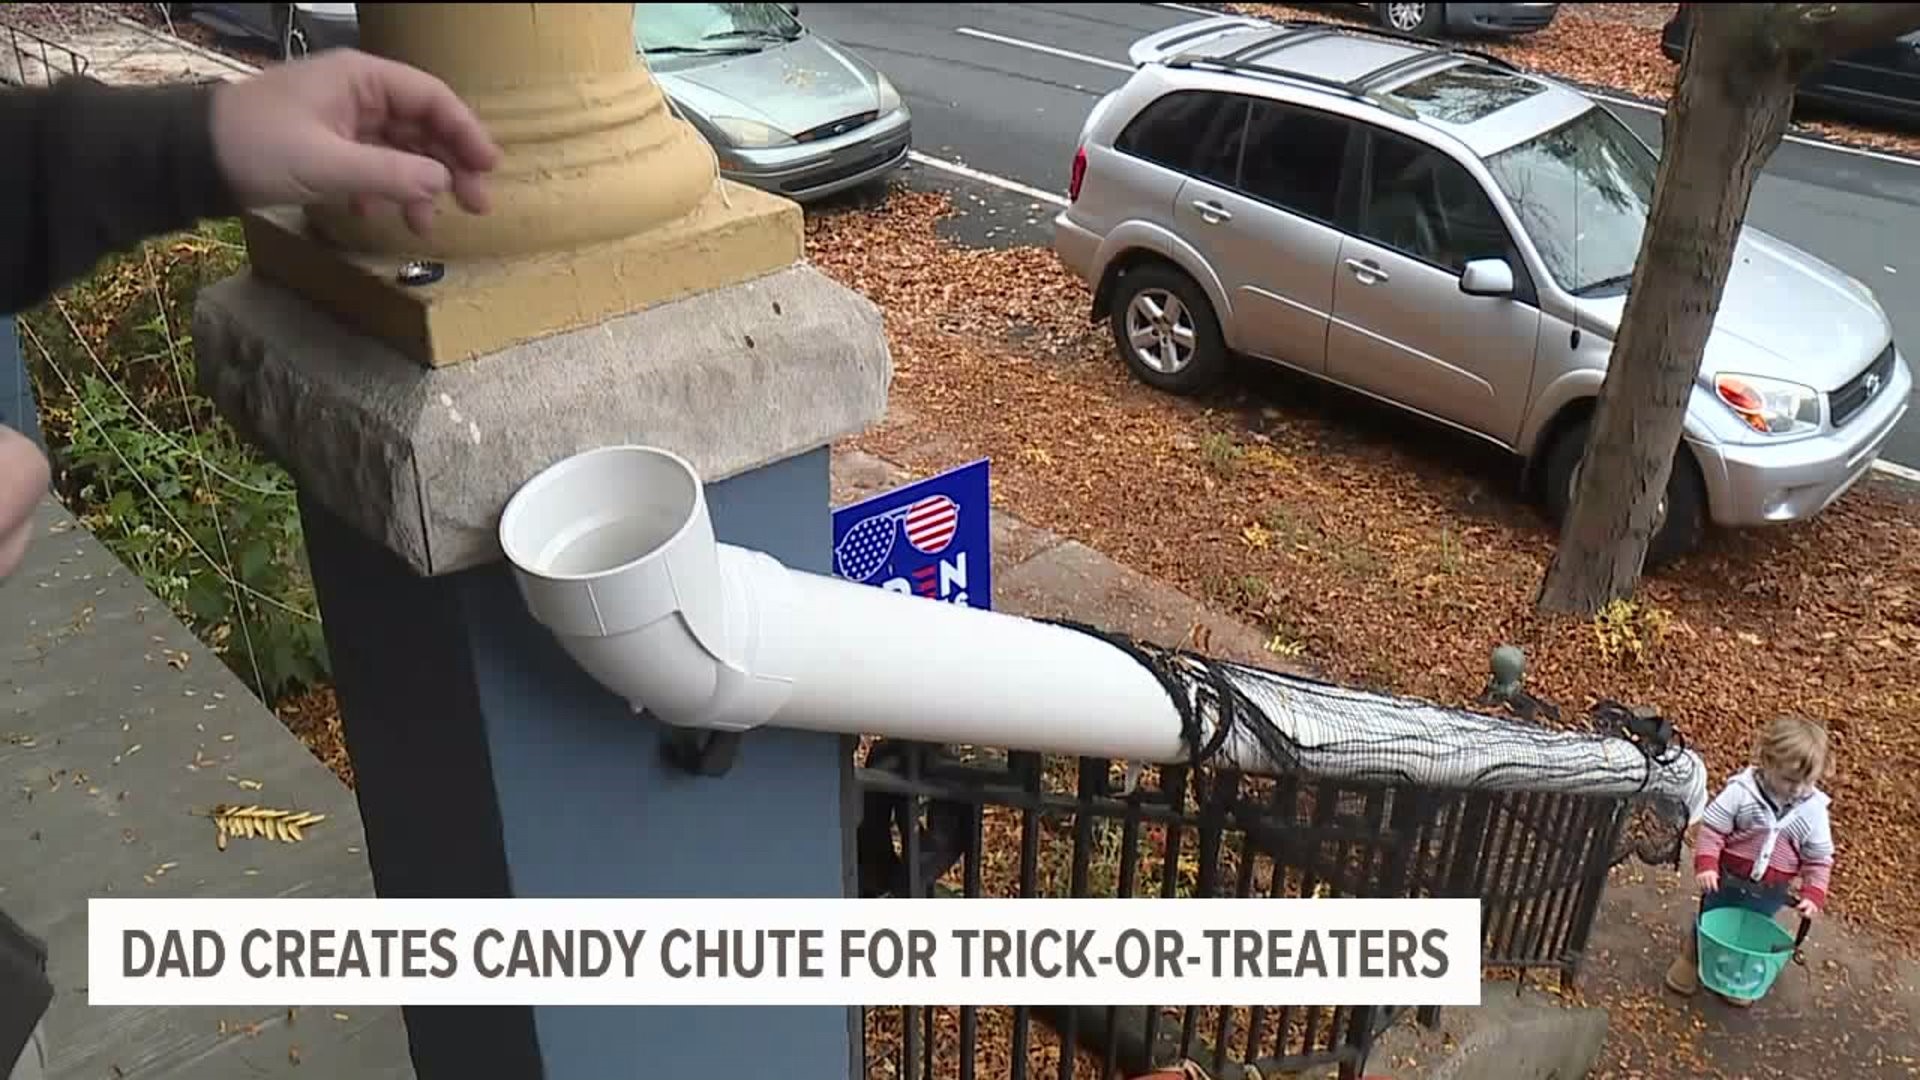 Giving out candy this Halloween just got a whole lot easier and safer for kids. A dad in Lancaster built a "candy chute" with treats sliding right into kids buckets.